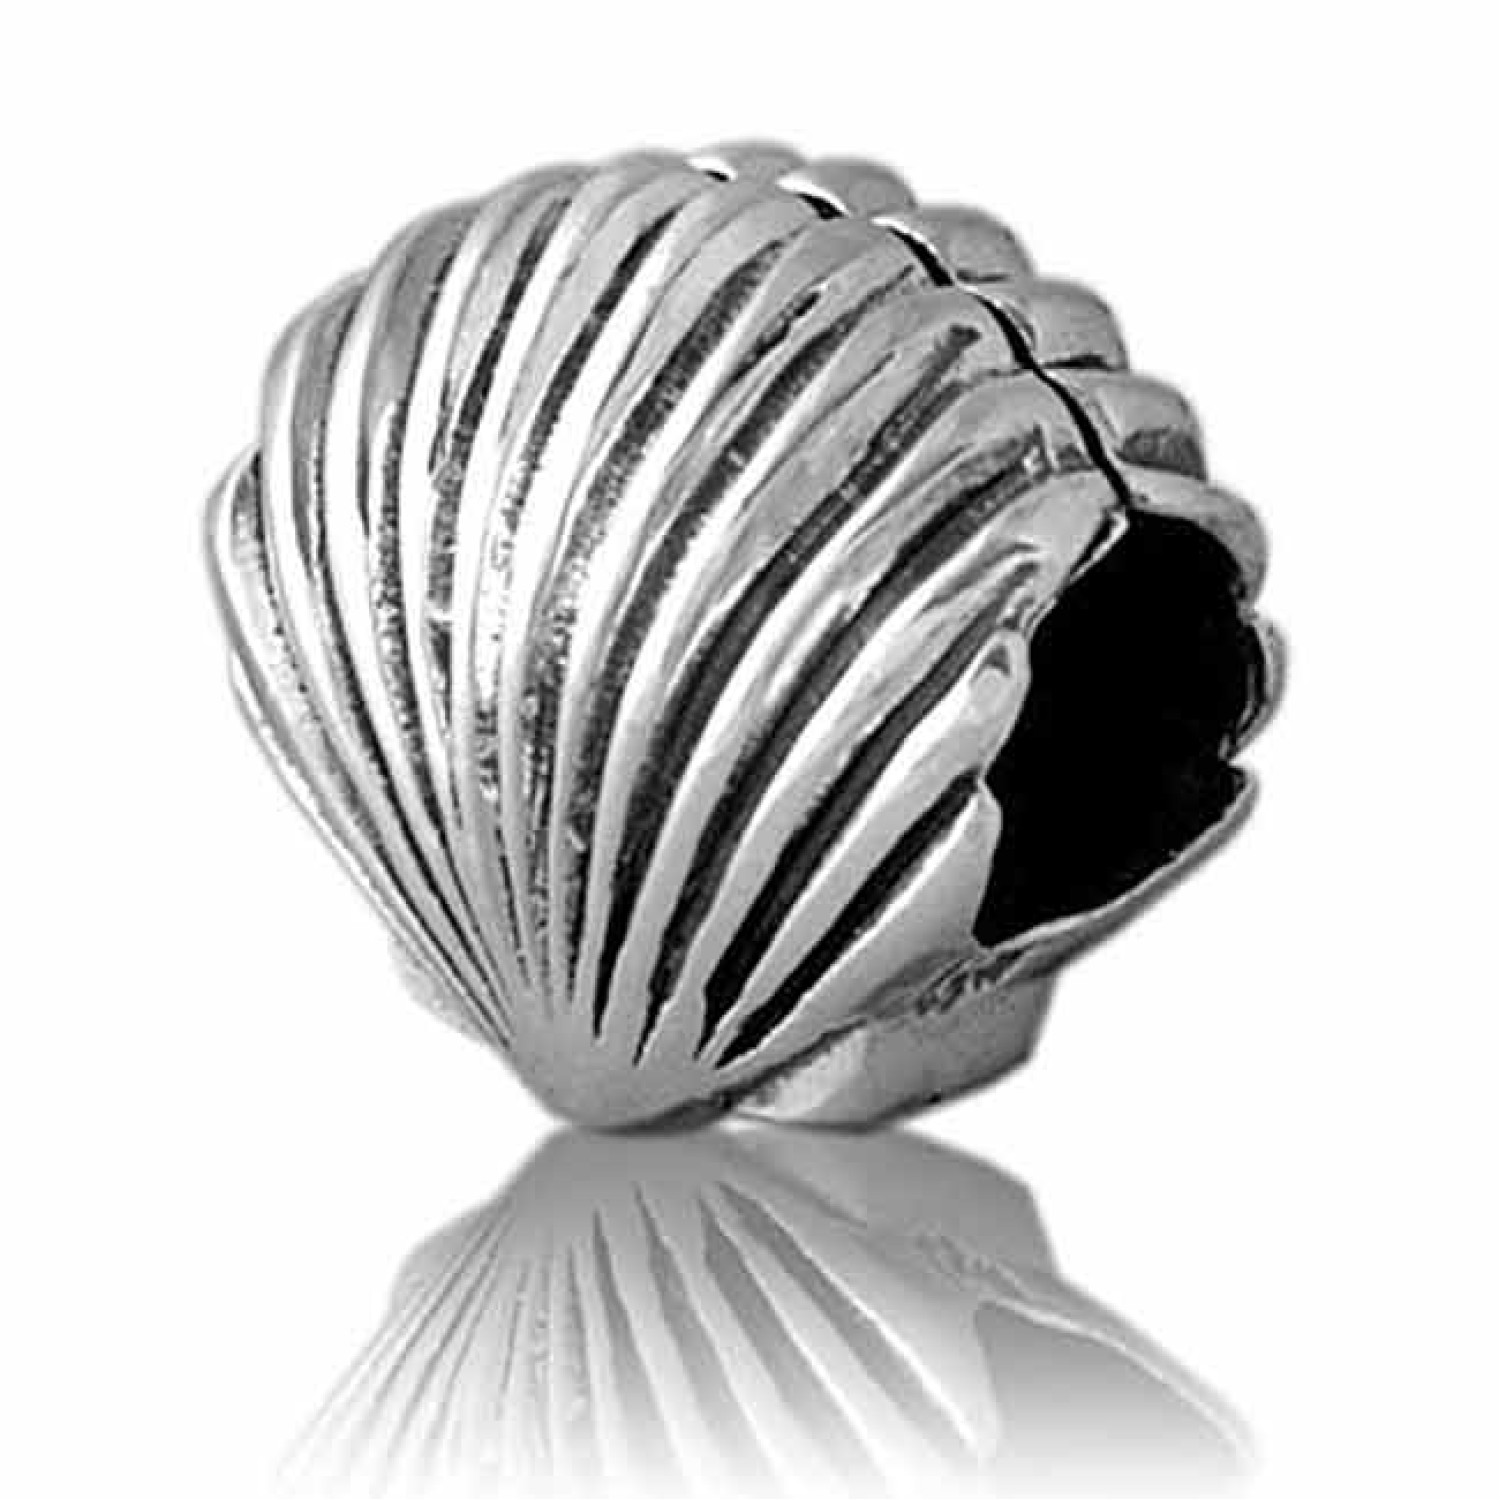 LK083 Evolve Charms Scallop. Evolve New Zealand Scallops Charm Scallops are cultivated by suspending spat-collecting bags in coastal waters during summer. Thousands of scallop larvae settle out of the plankton onto the fine feathery surface of the b @chri